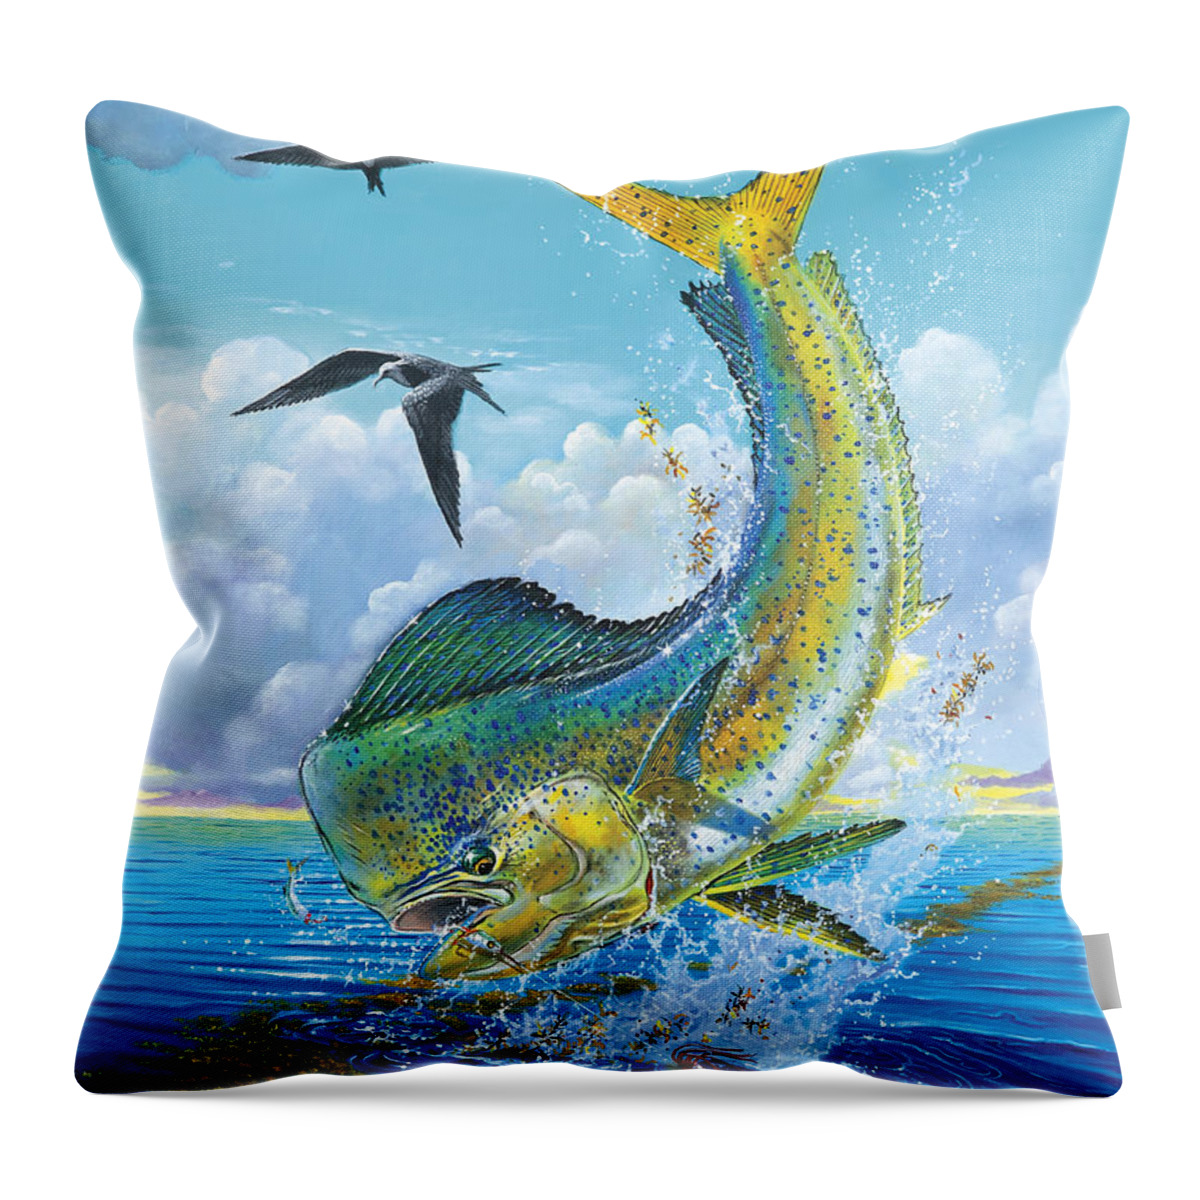 Dolphin Throw Pillow featuring the painting Slammer Off0017 by Carey Chen